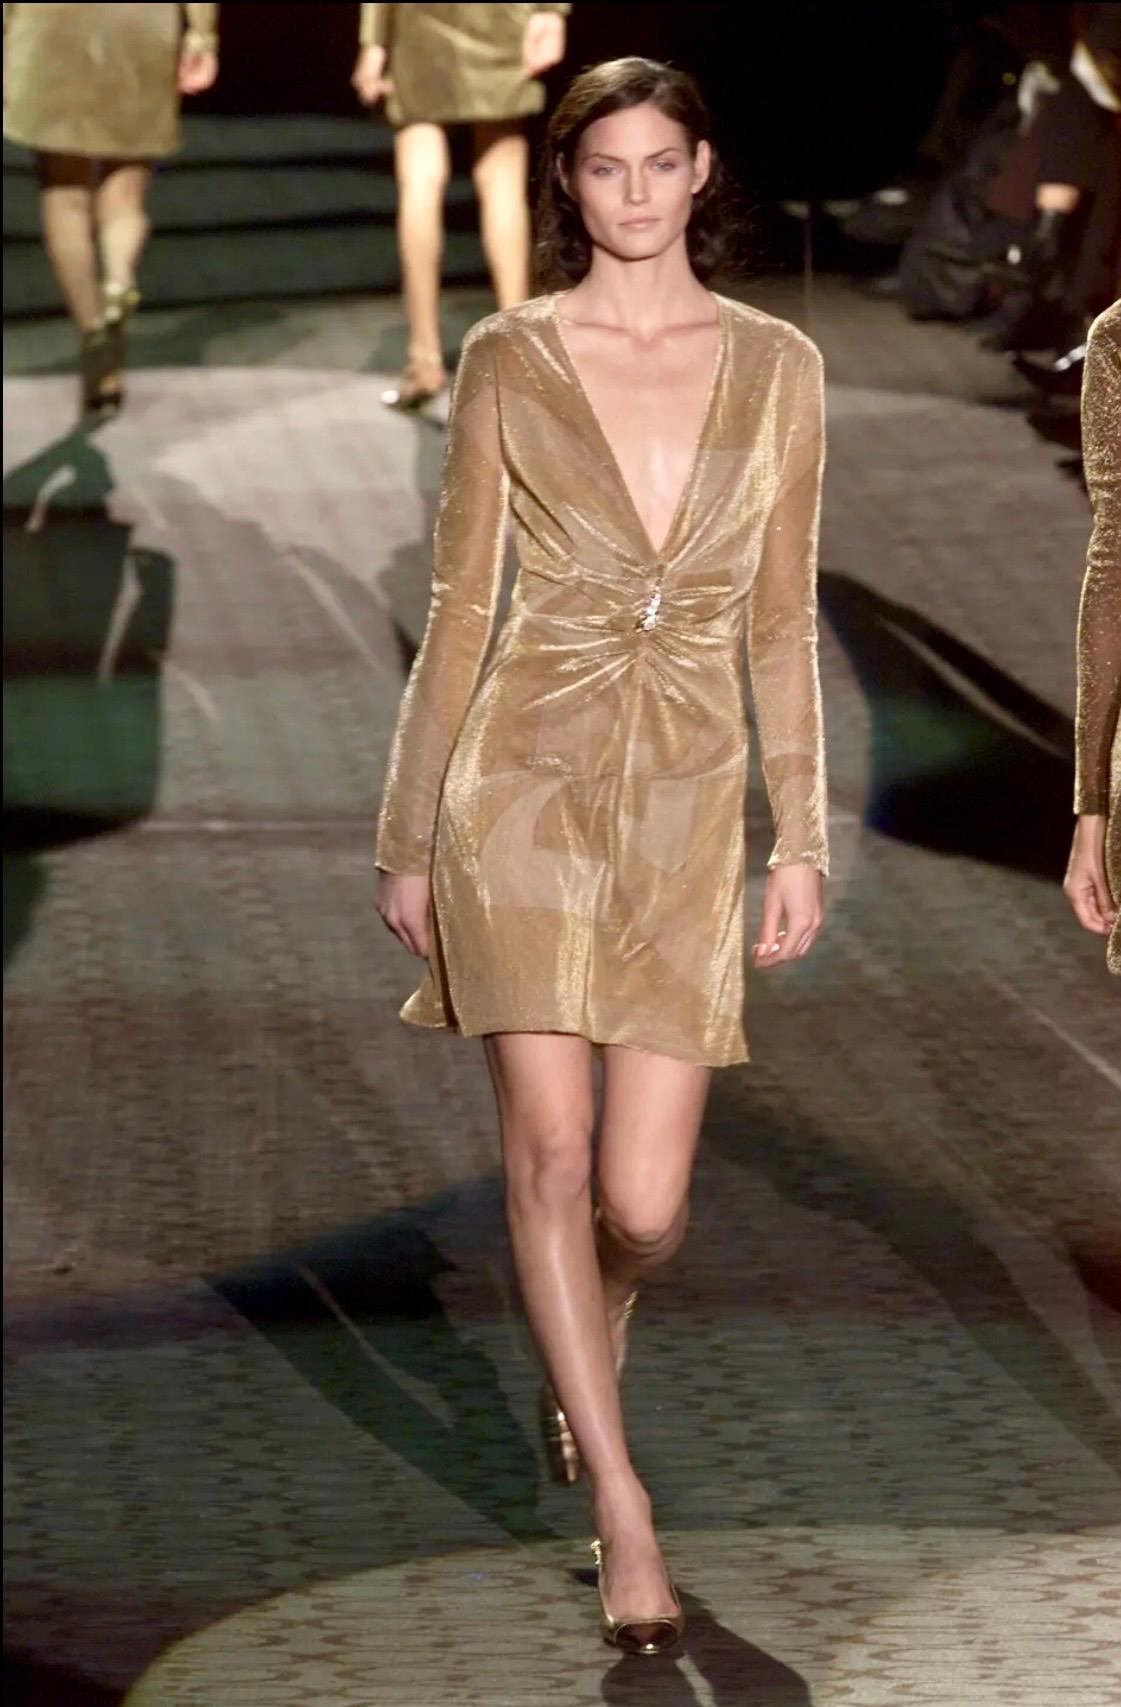 Tom Ford for Gucci F/W 2000 Runway Plunged Neckline Metallic Knit Mini Dress For Sale 5